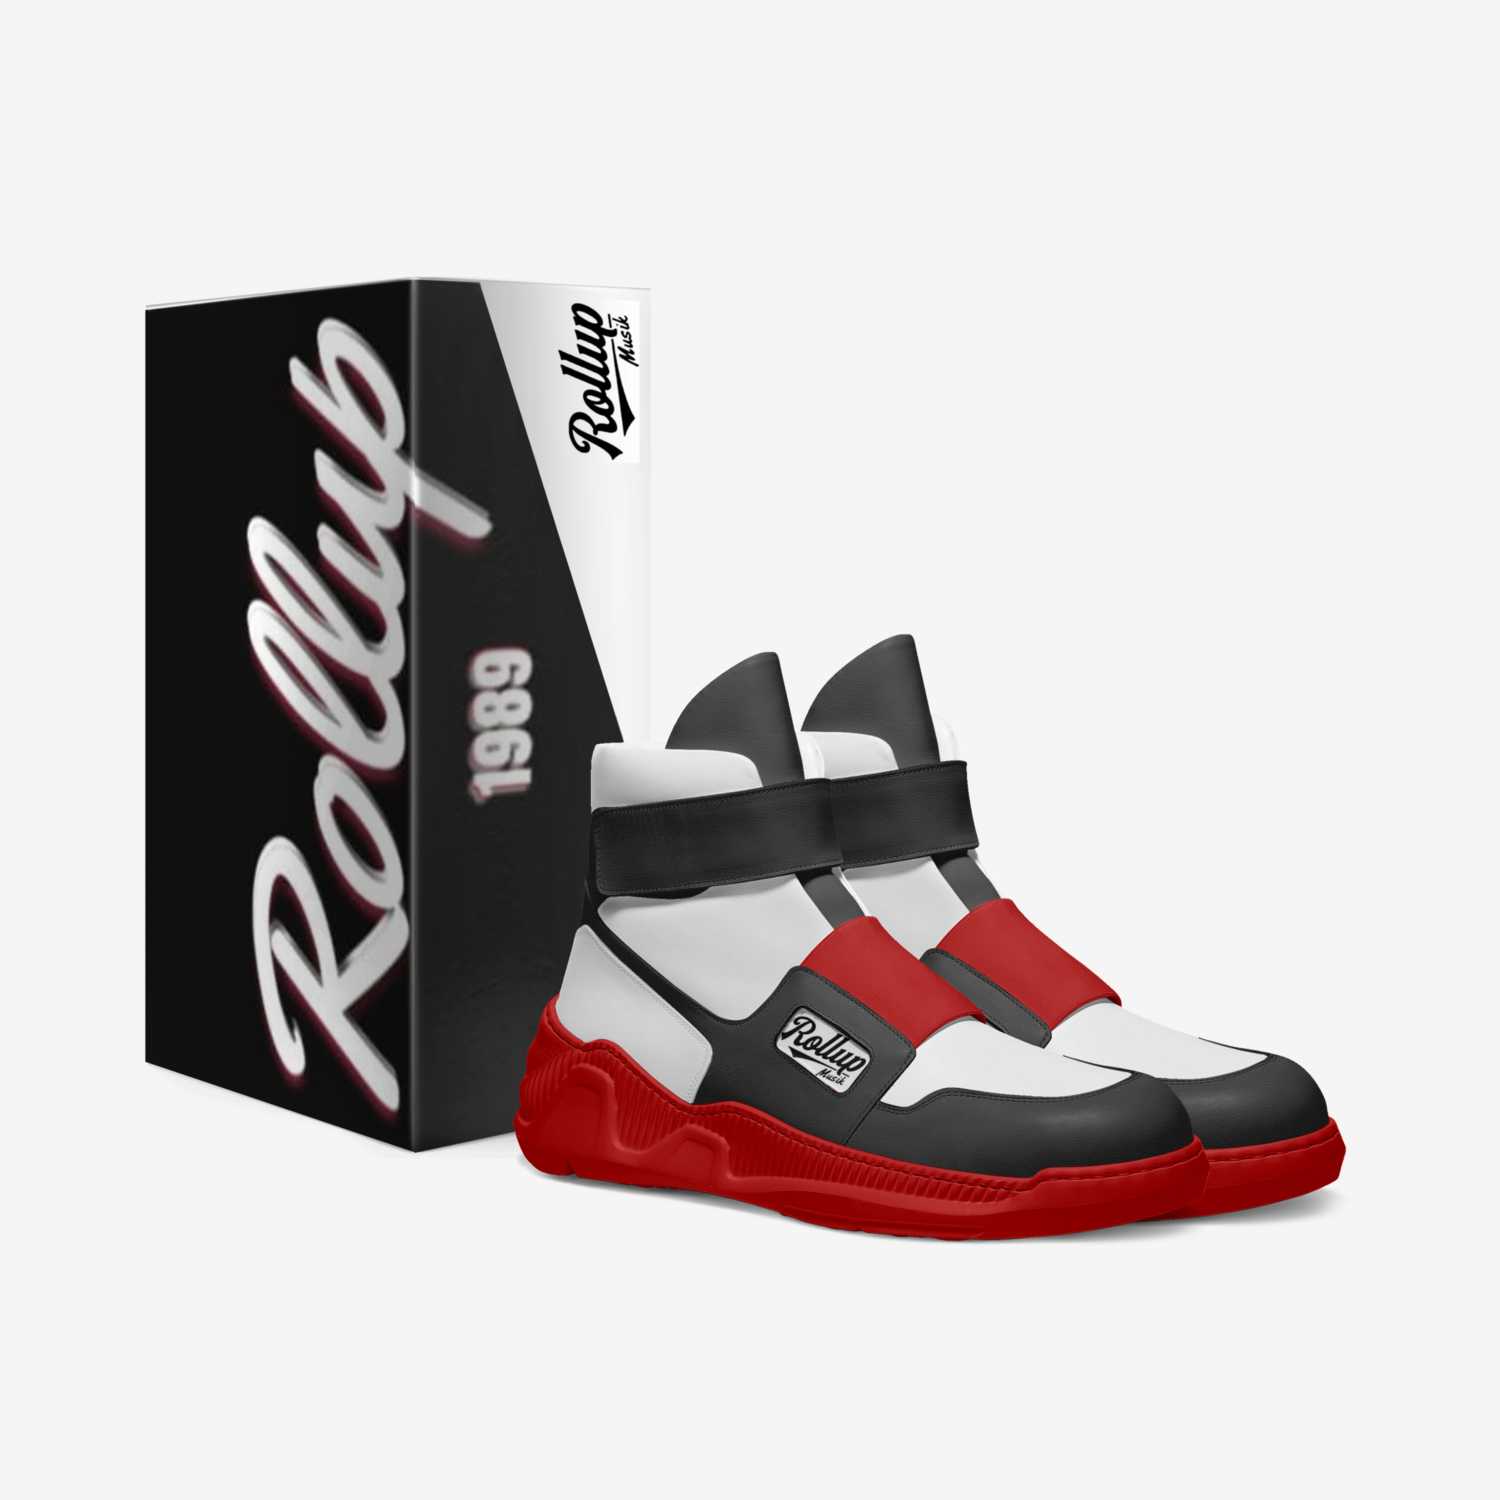 Rollup 2  custom made in Italy shoes by Jose Nunda | Box view